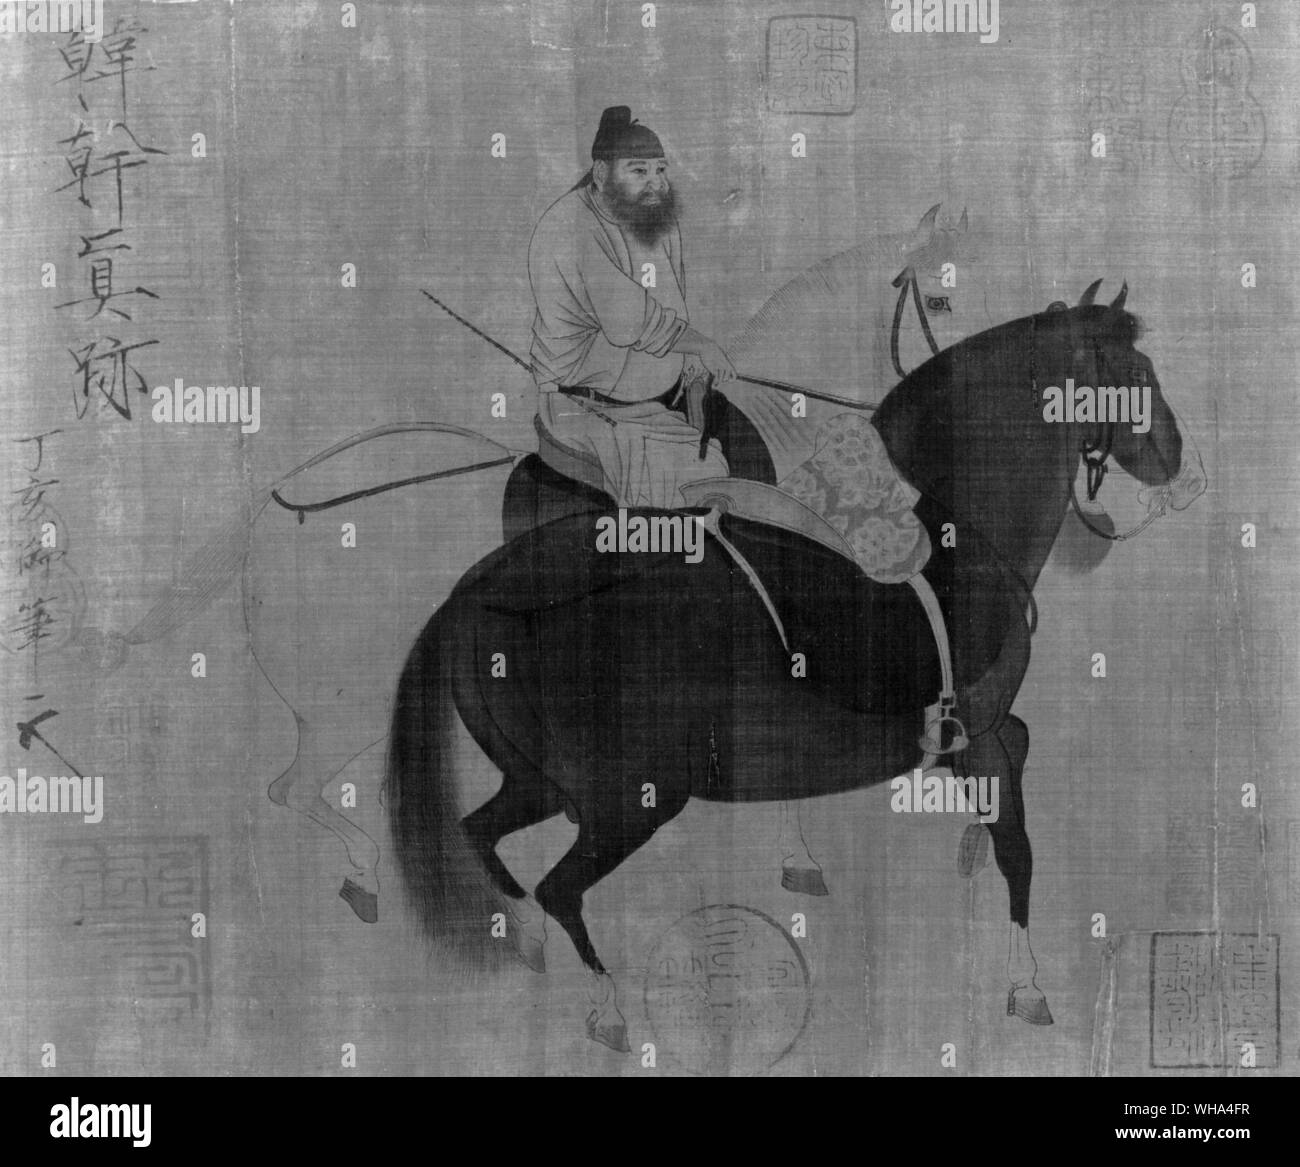 Han Kan. Tang painter 618-906. Han-Kan lived in Chang-an, the capital of the Tang dynasty (618 -907). He painted Buddhist and Taoist wall paintings but became mostly famous for his great compositions of horse paintings which represented the knightly spirit of his time. He is considered one of the greatest classical Chinese master artists of animal painting. Stock Photo